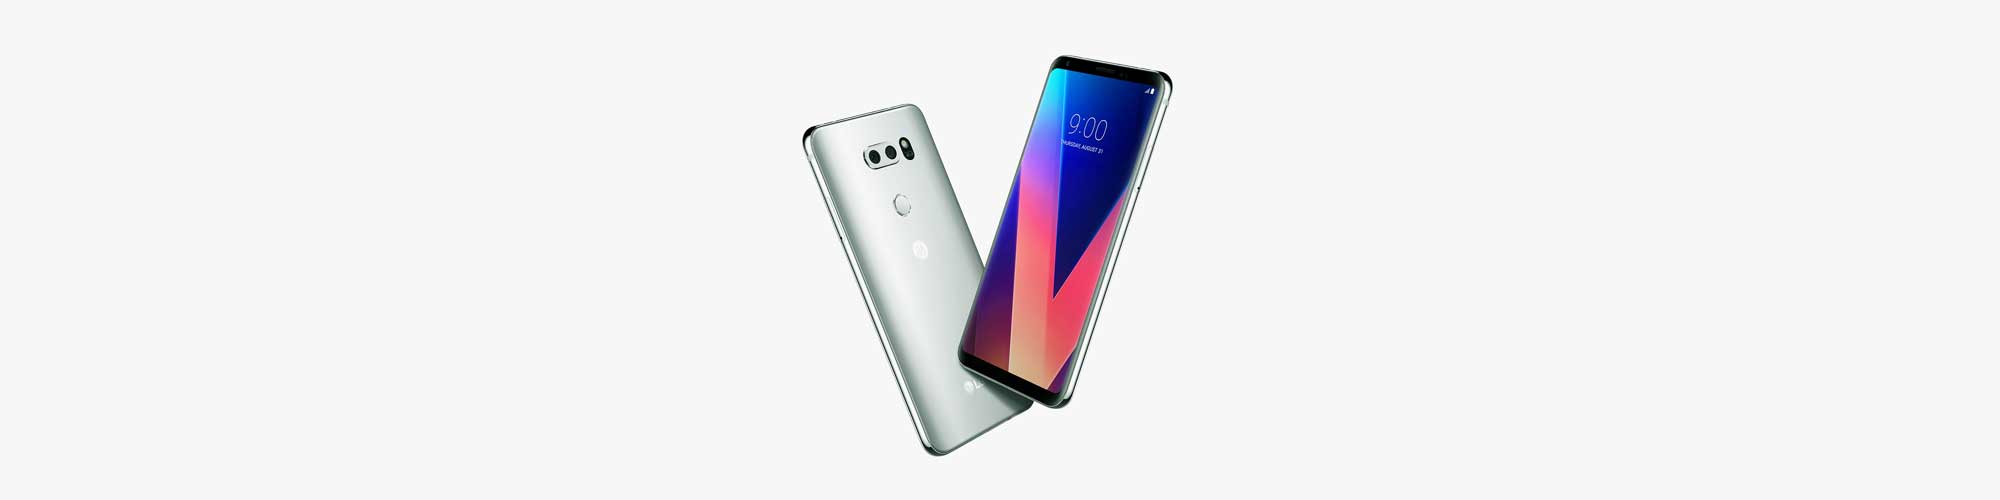  LG V30    Android Pie!